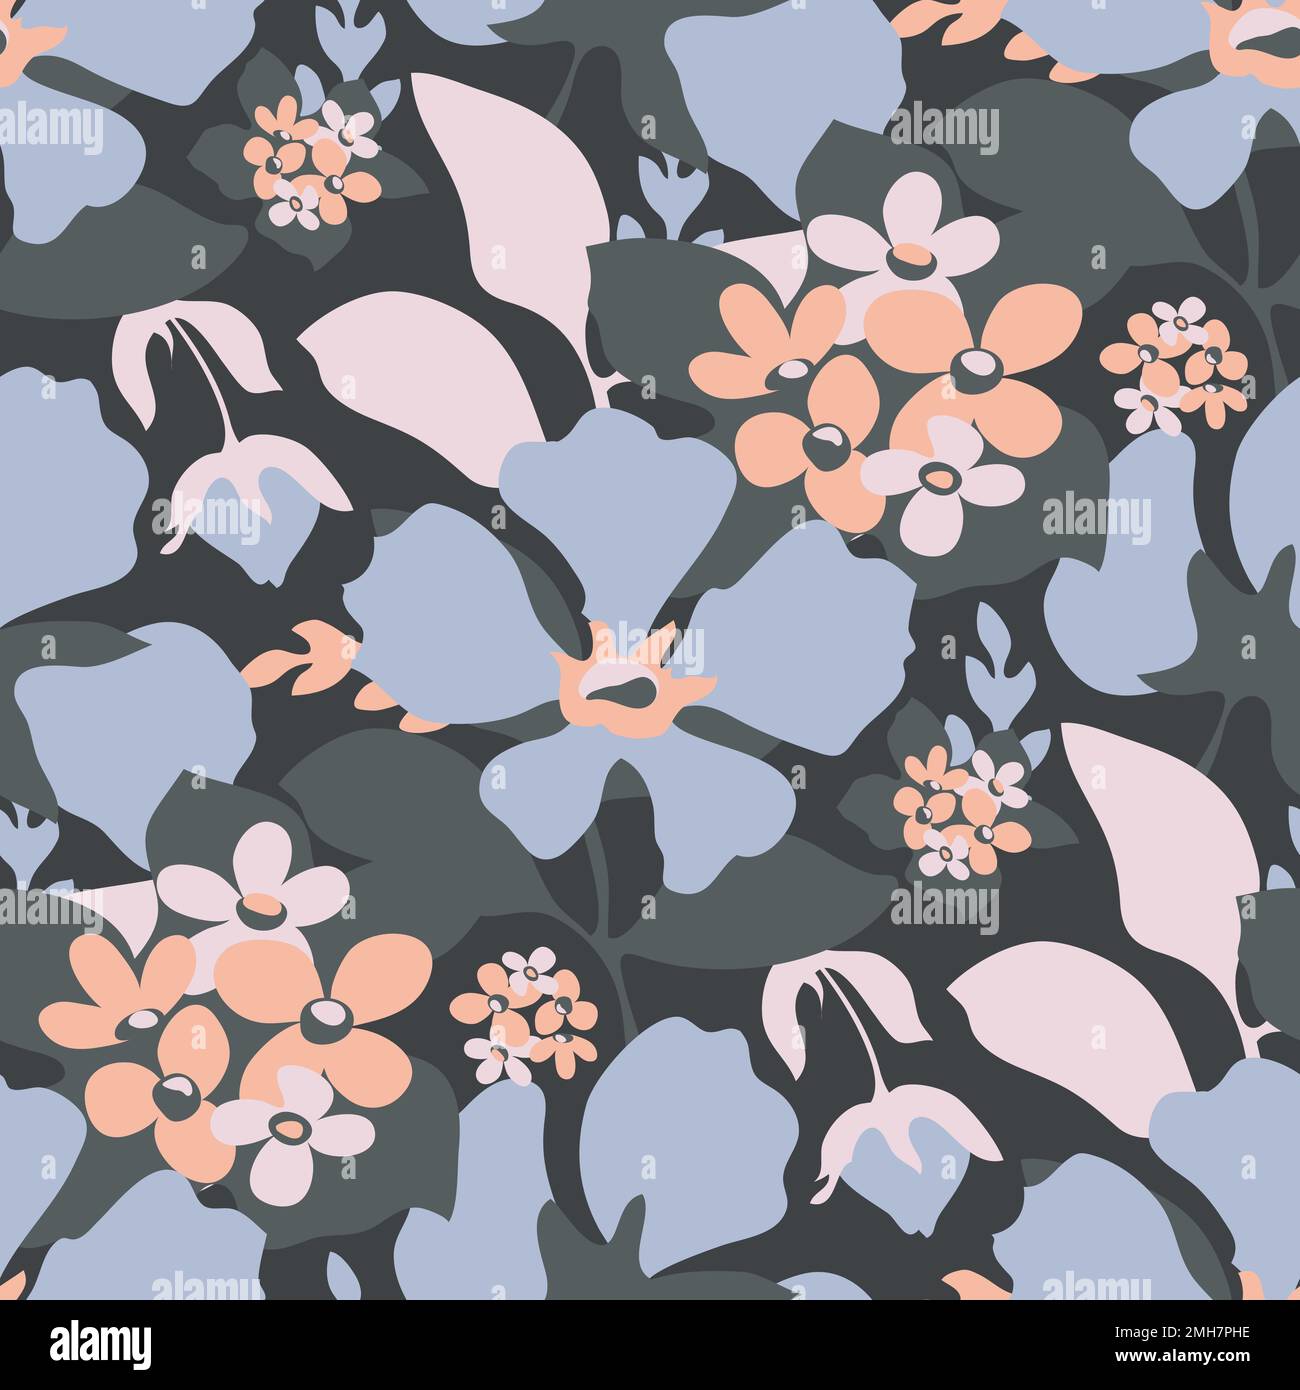 Vector floral seamless pattern. Blue, pink and beige flowers, blue leaves. Stock Vector